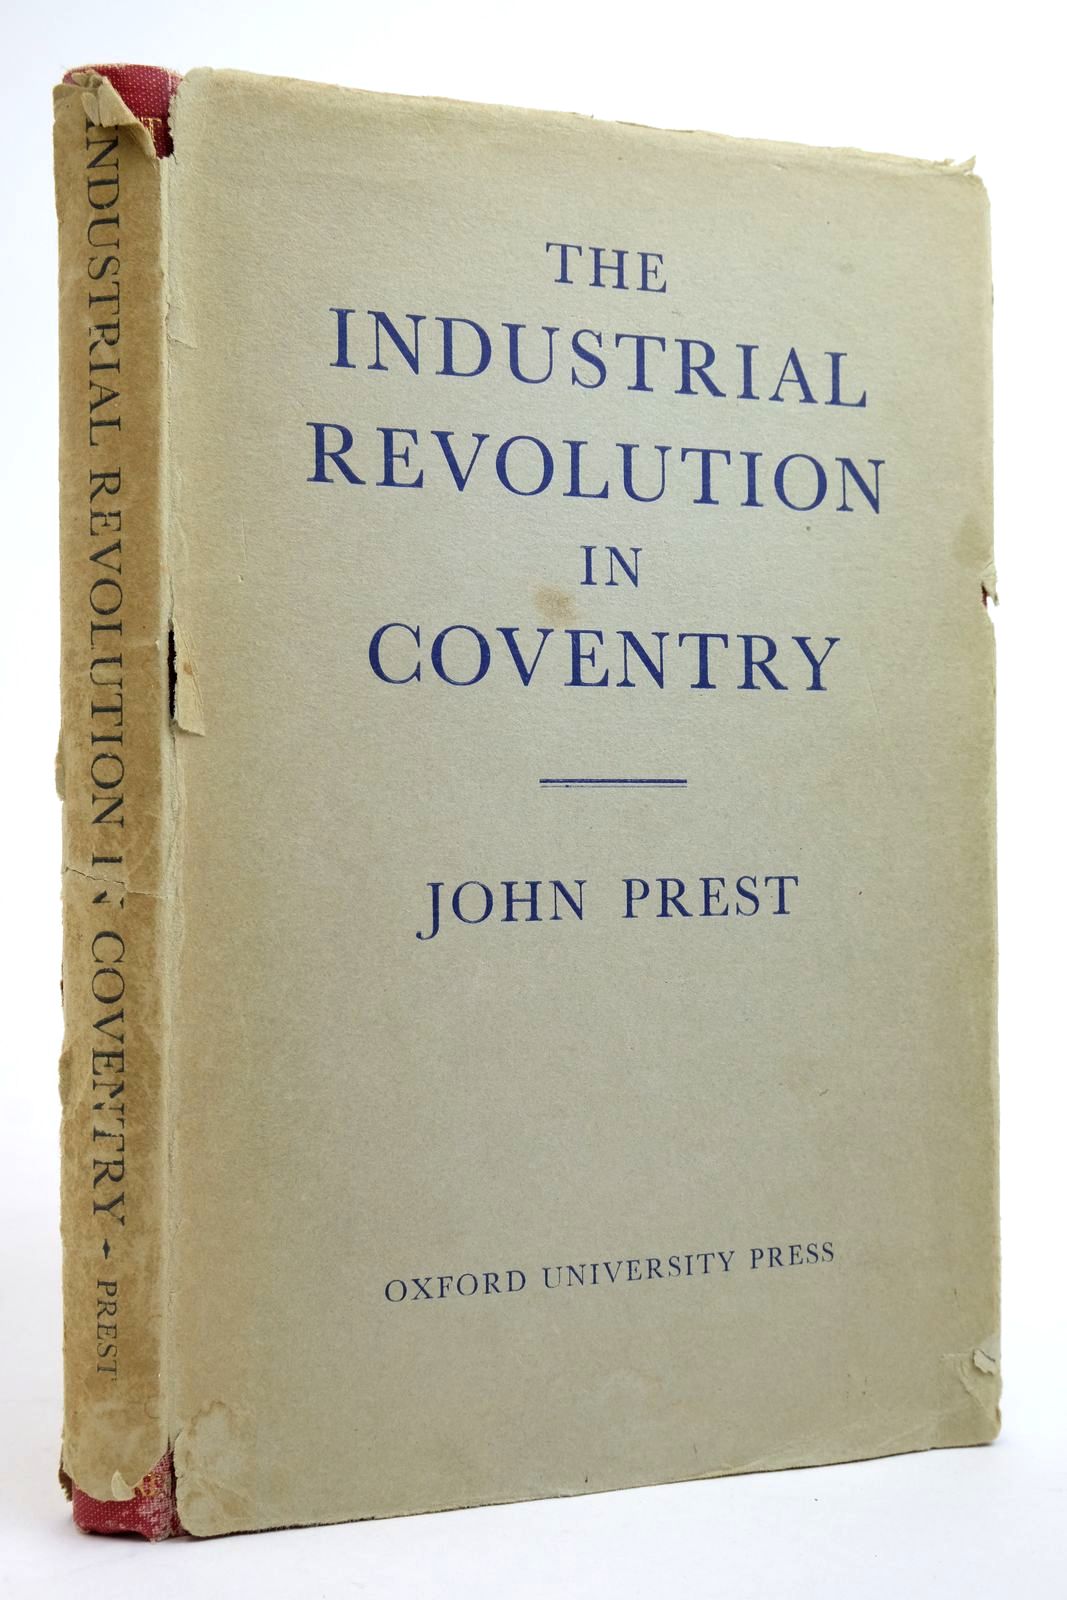 Photo of THE INDUSTRIAL REVOLUTION IN COVENTRY written by Prest, John published by Oxford University Press (STOCK CODE: 2135651)  for sale by Stella & Rose's Books